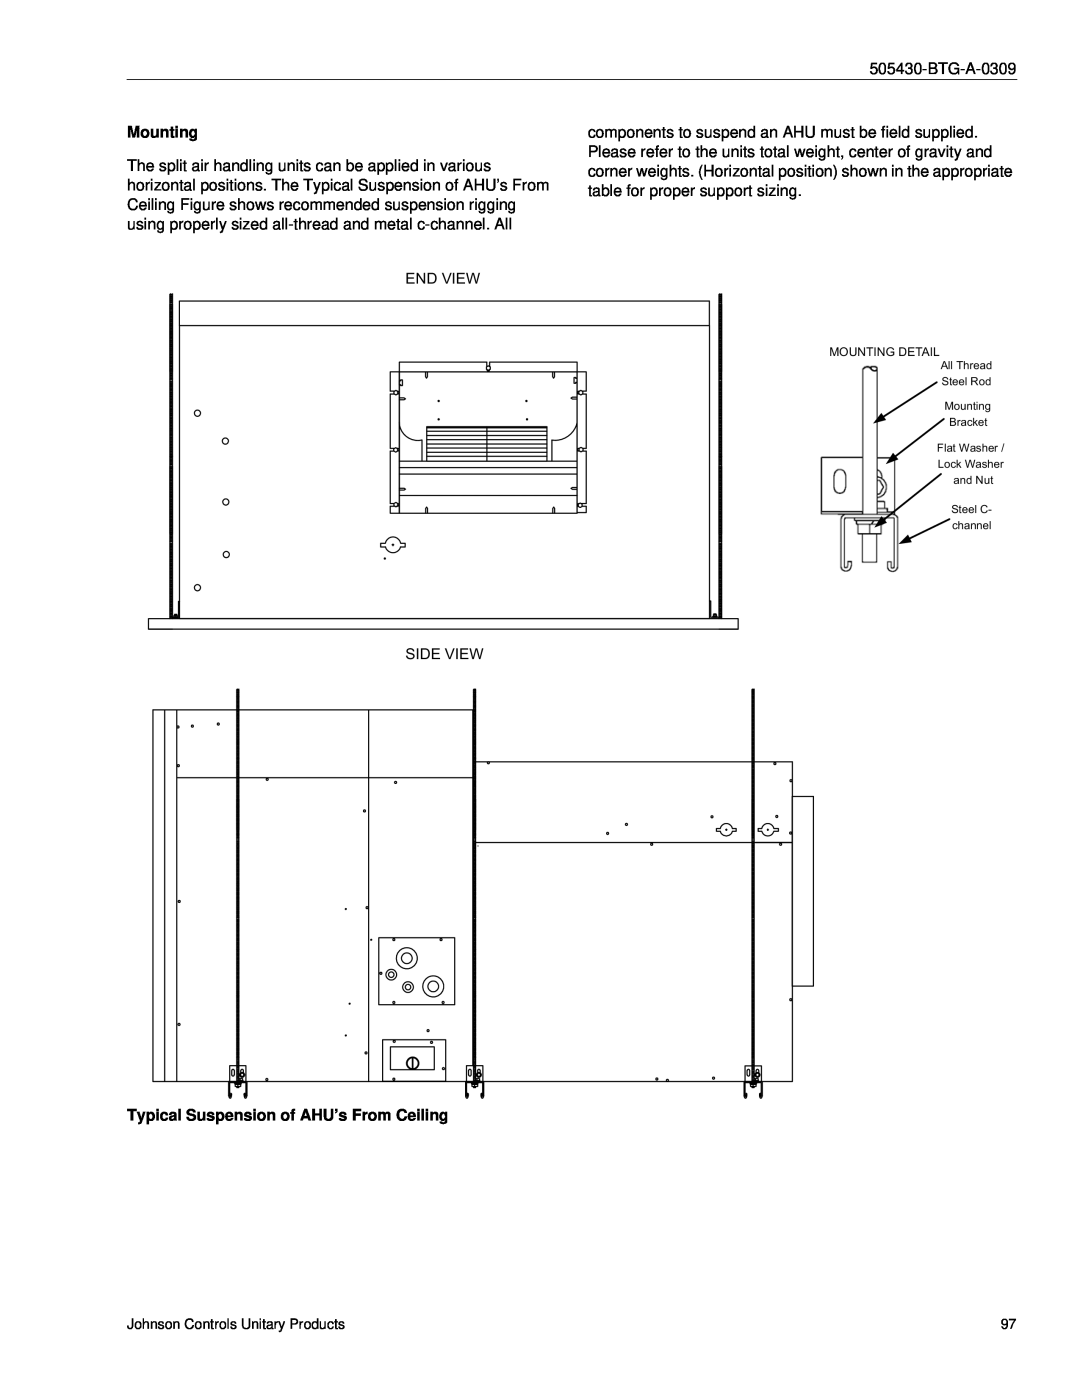 Johnson Controls R-410A manual Mounting, Typical Suspension of AHU’s From Ceiling 